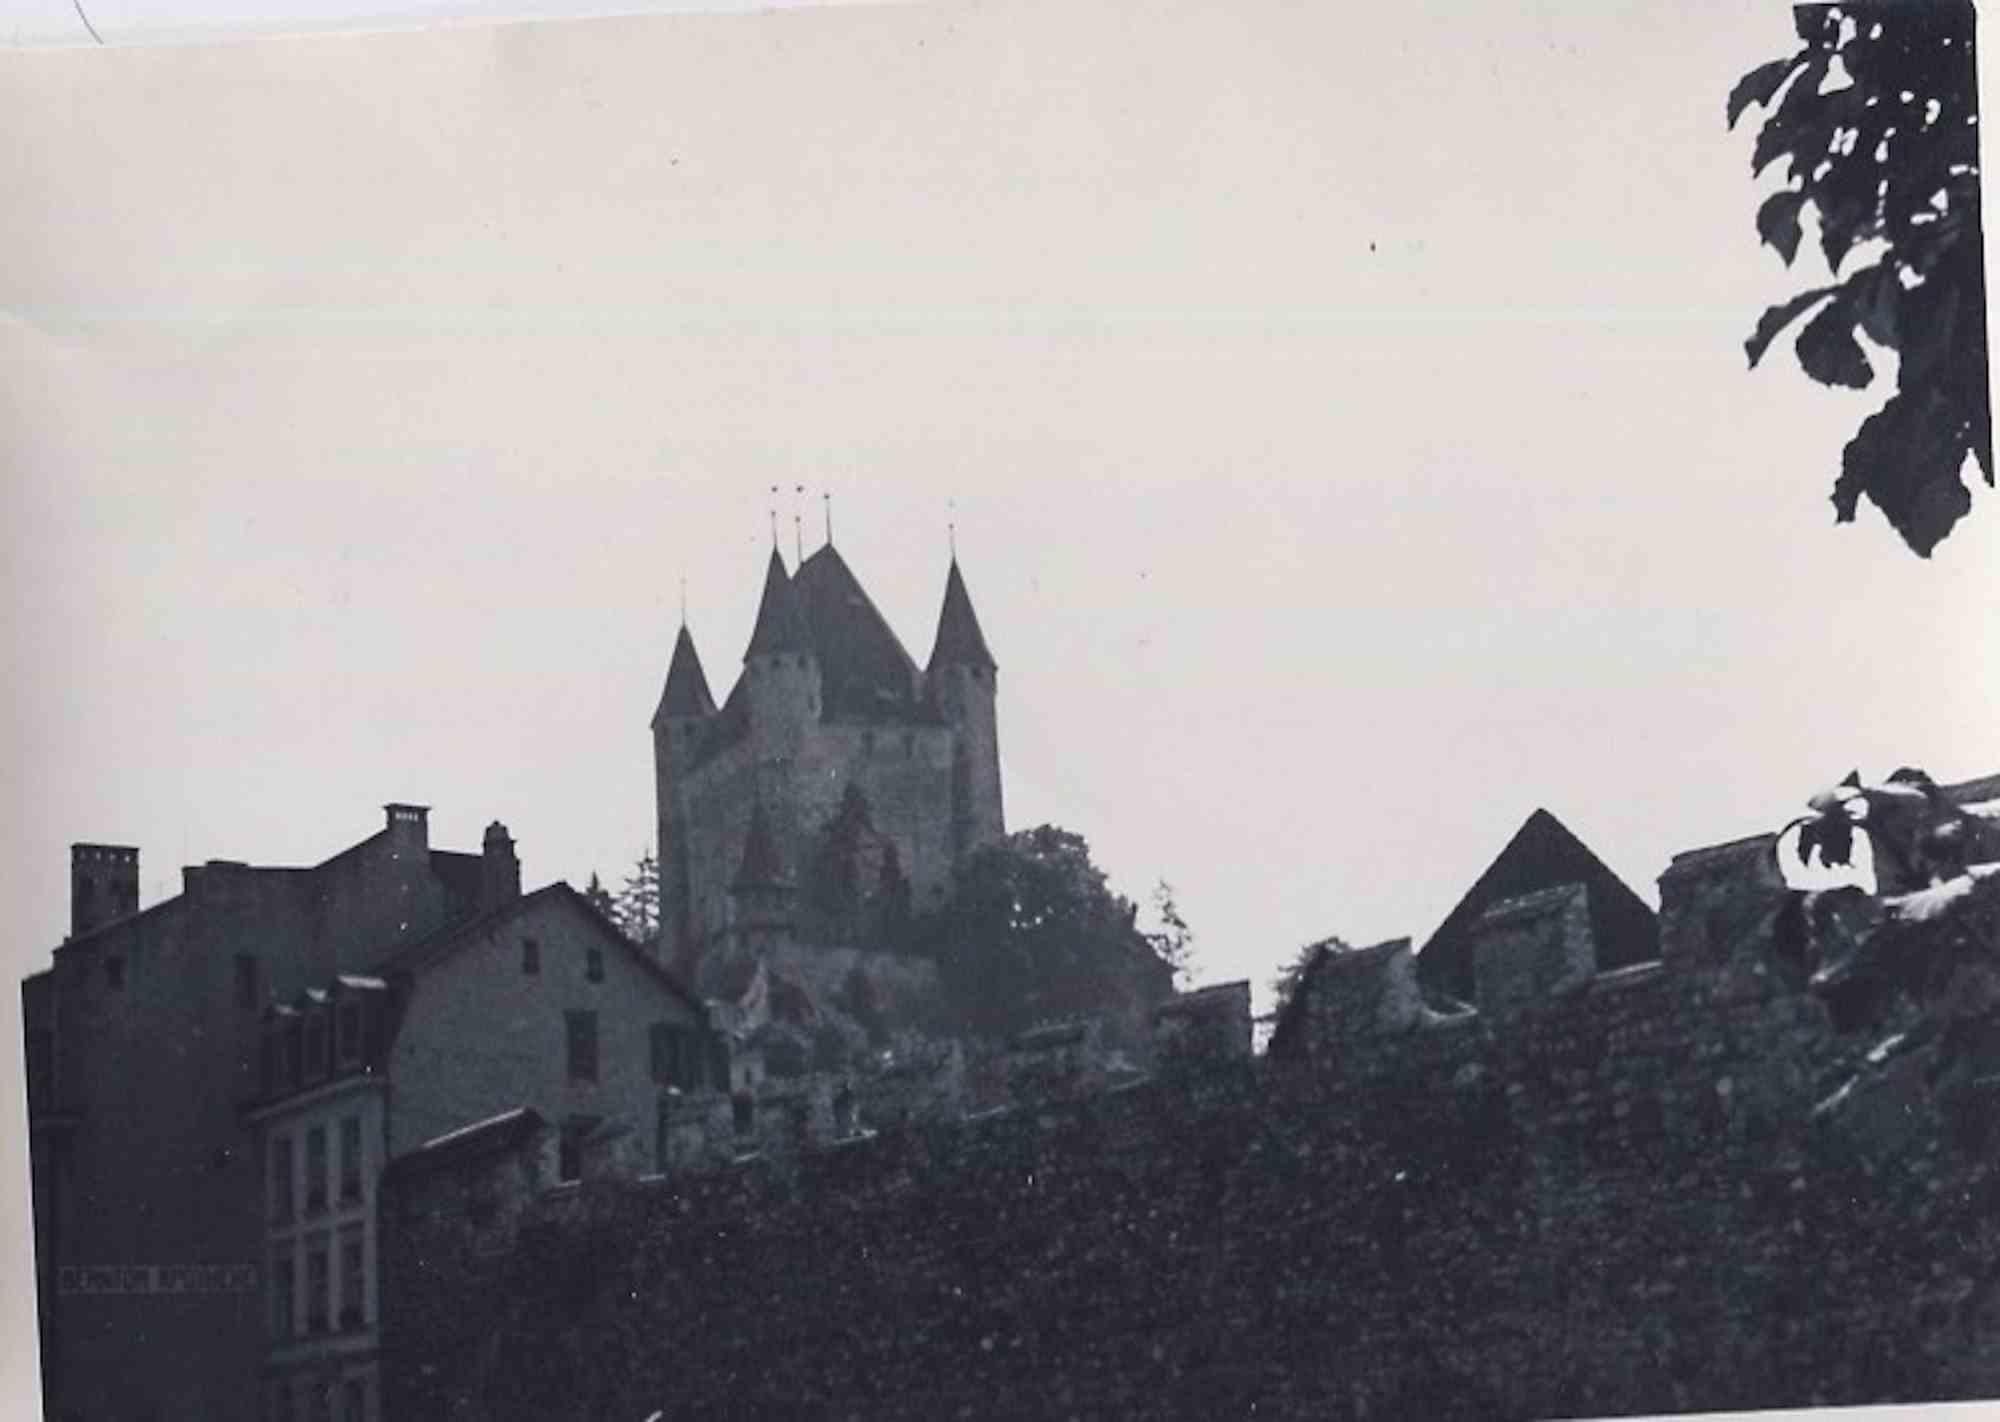 Unknown Landscape Photograph - Old days Photo - Church - Vintage Photo - mid-20th Century